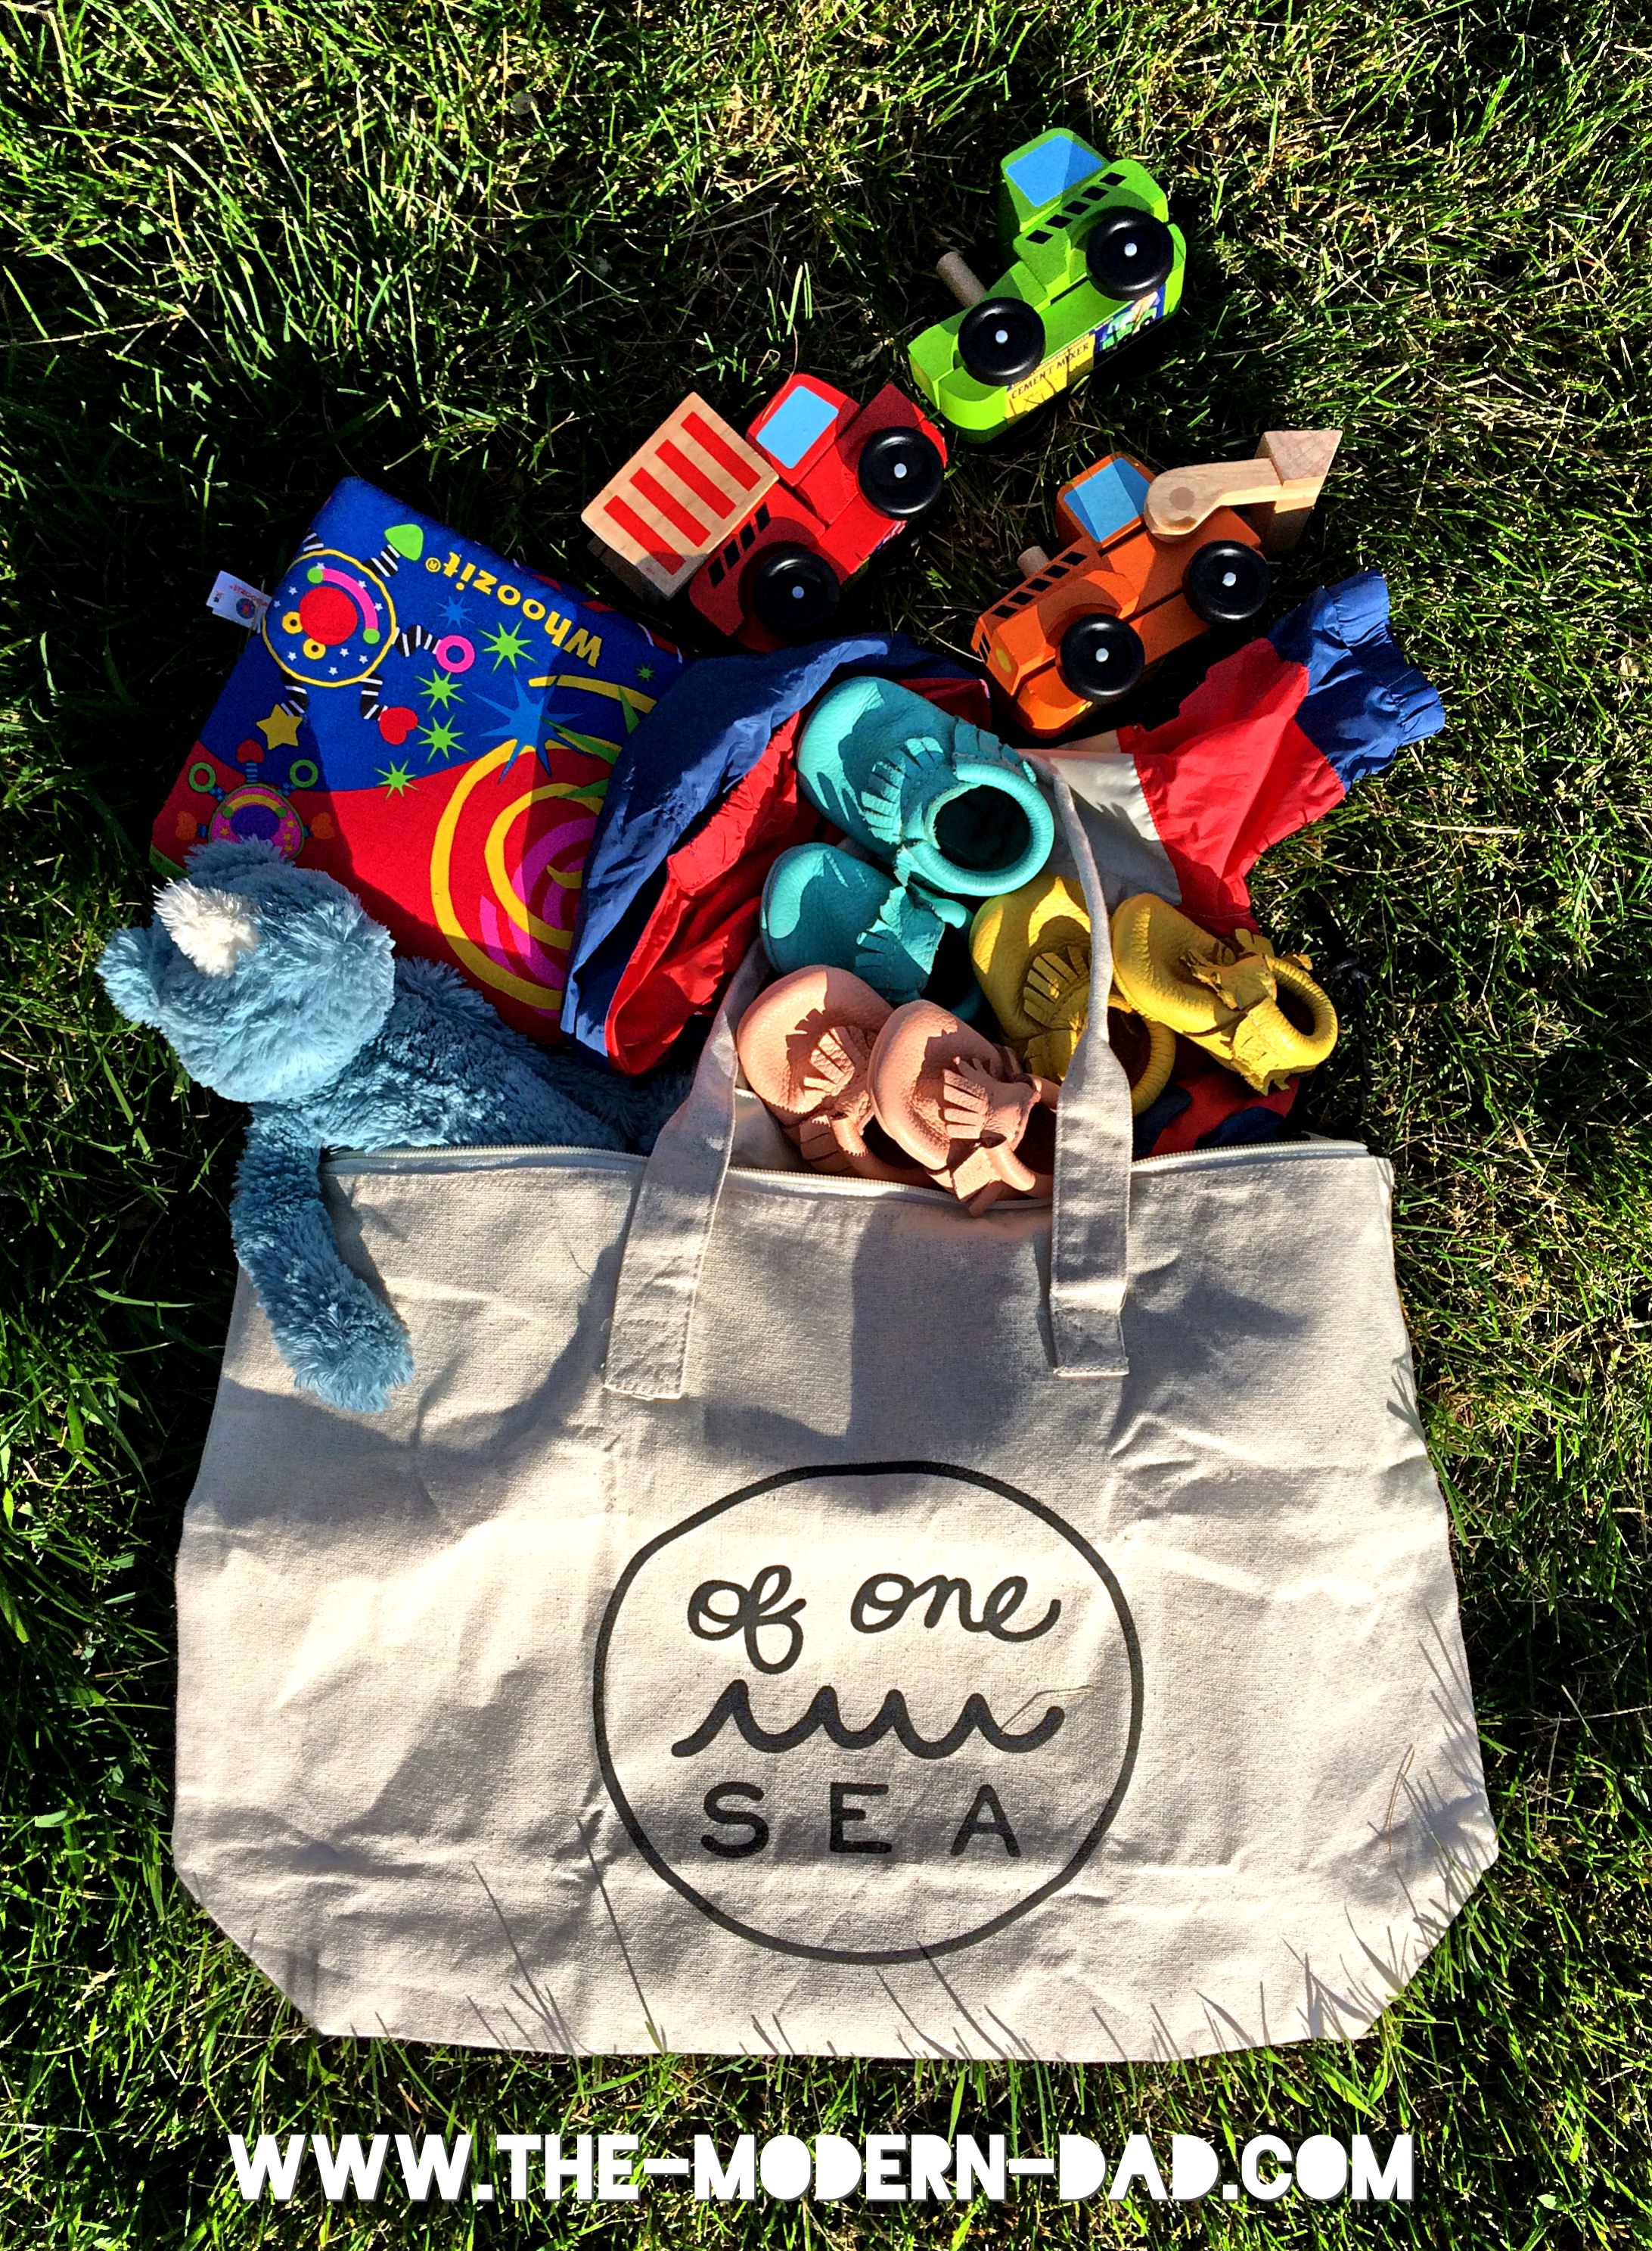 of one sea bag at the park